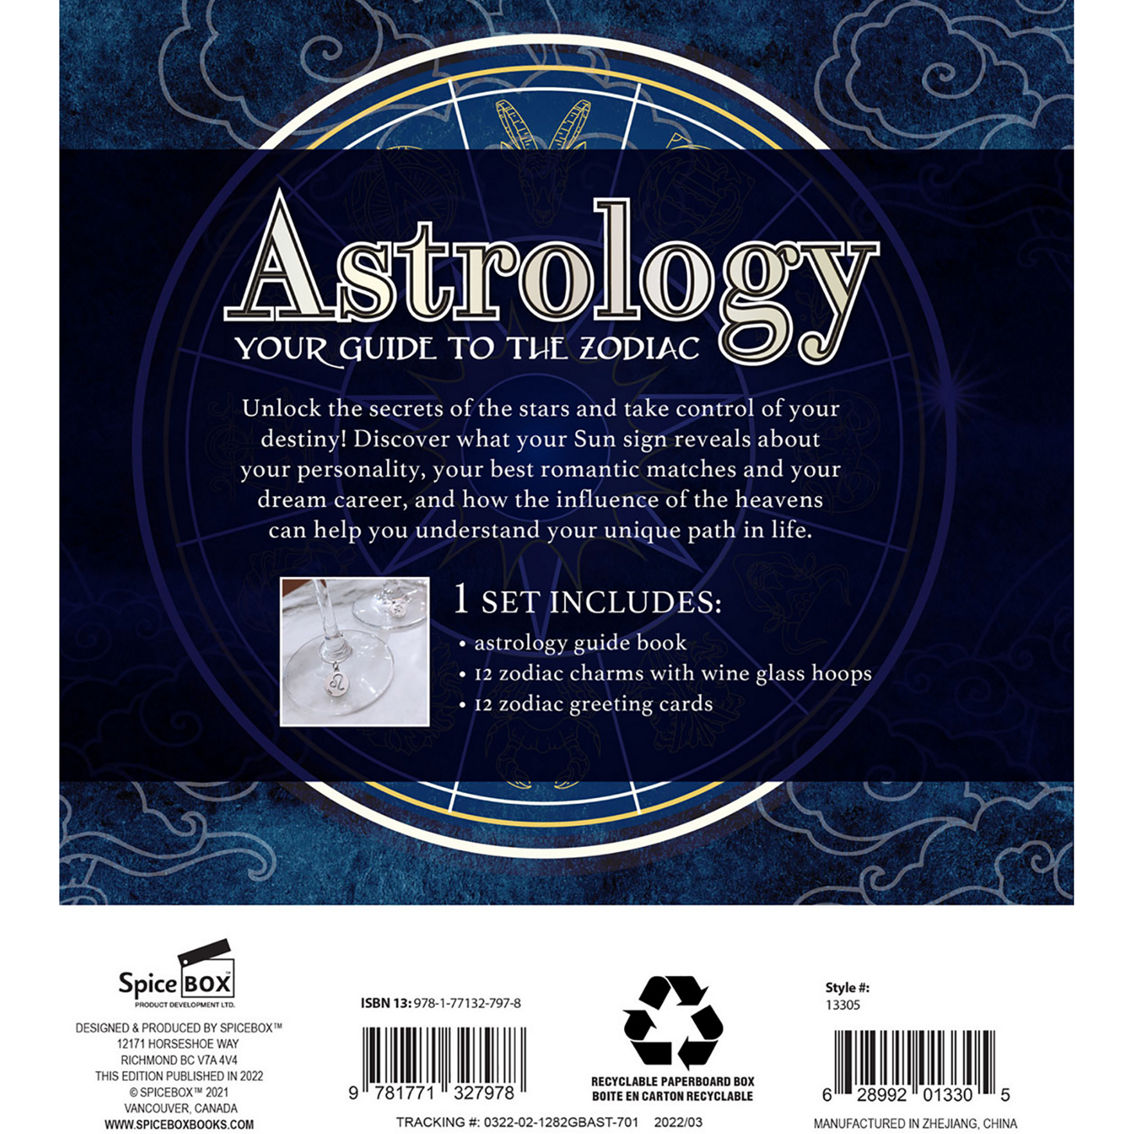 SpiceBox Gift Box: Astrology - Image 2 of 6